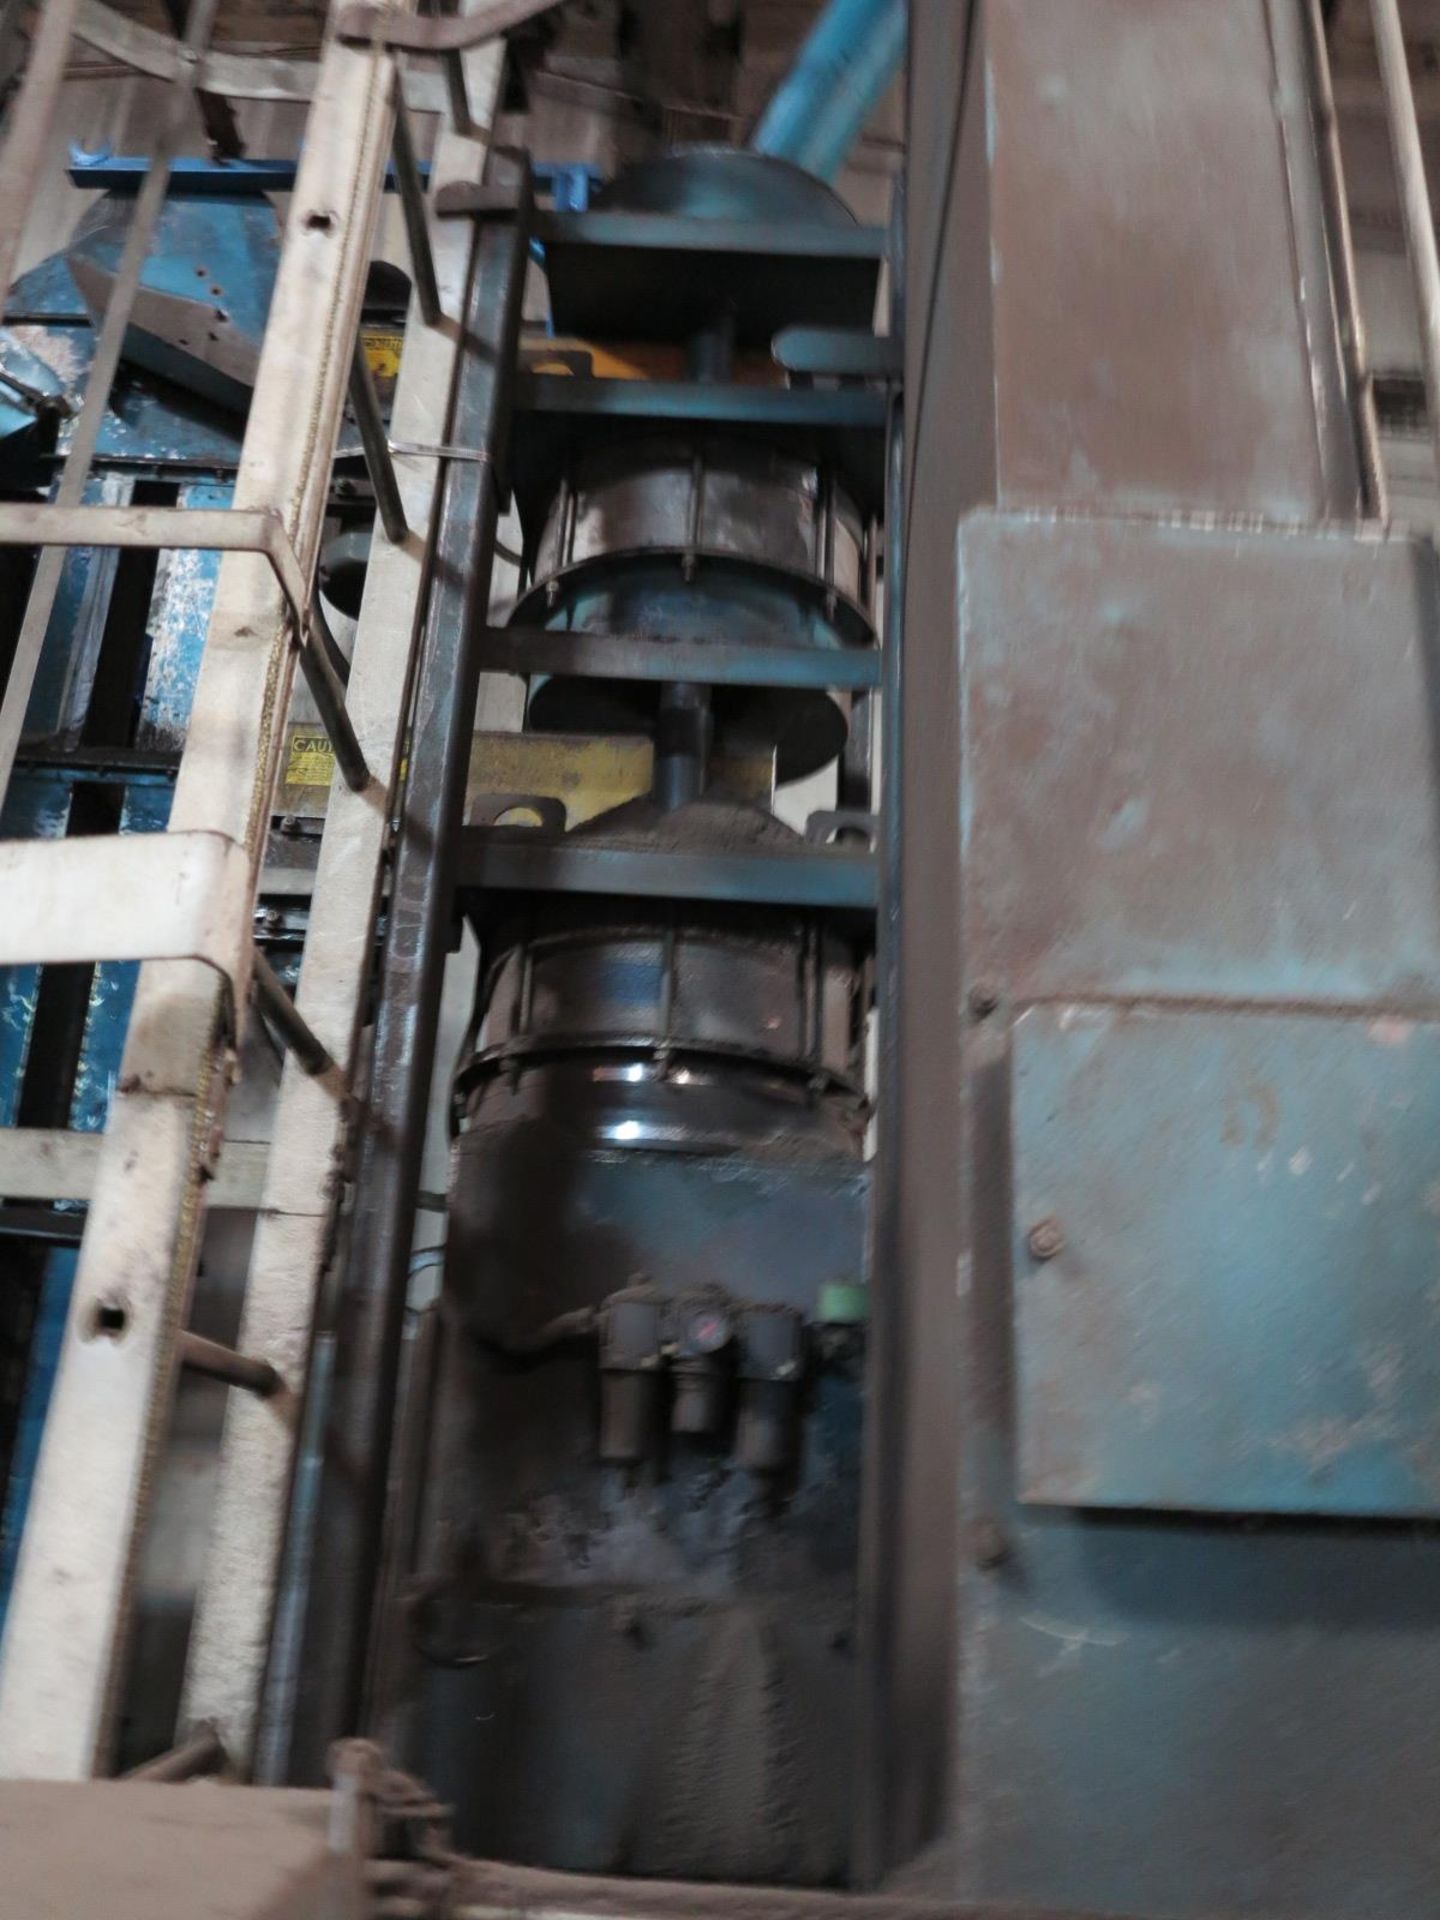 LOT - SAND RECLAIM SYSTEM, INCLUDING DEPENDABLE LUMP BREAKER, (2) BUCKET ELEVATORS, RECLAIMER AND CO - Image 4 of 7